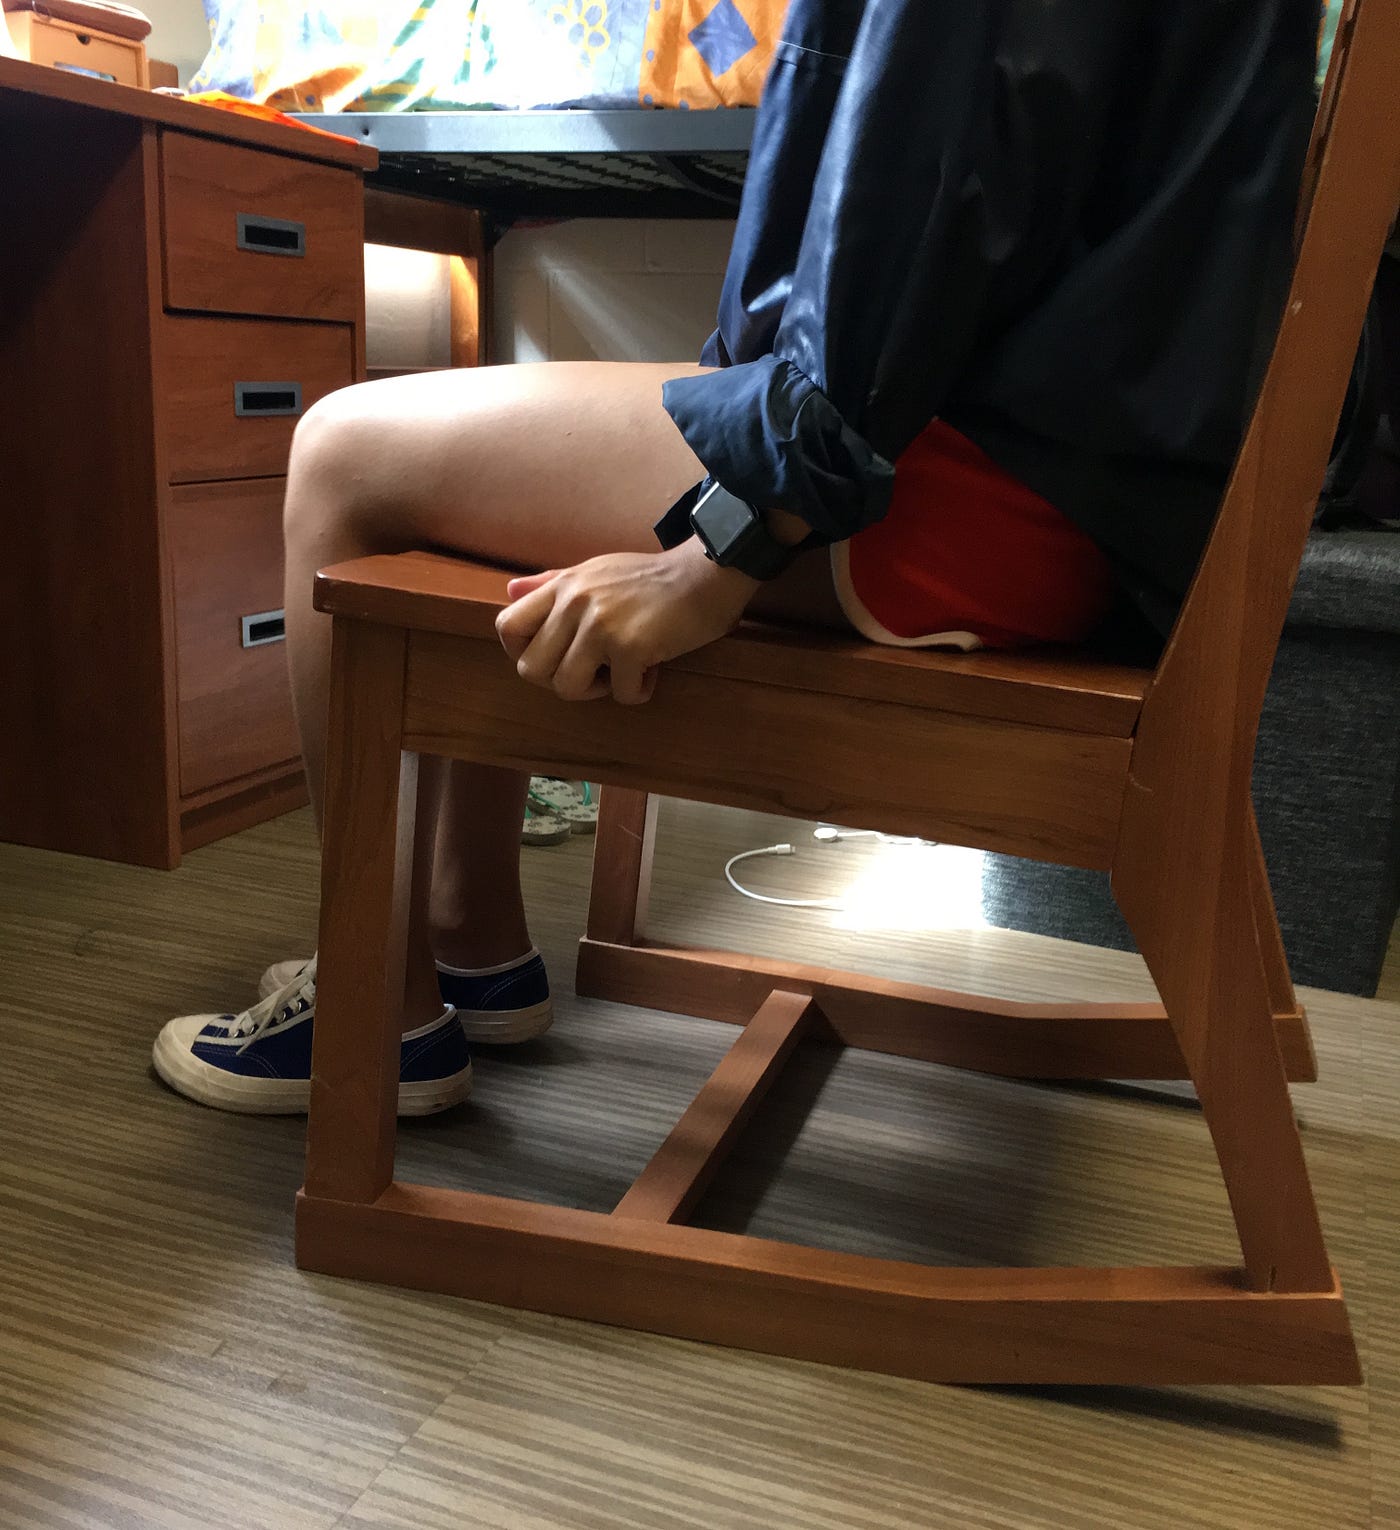 Critique — The Rocking Chair in Our Dorms | by Lisa Wang | Medium